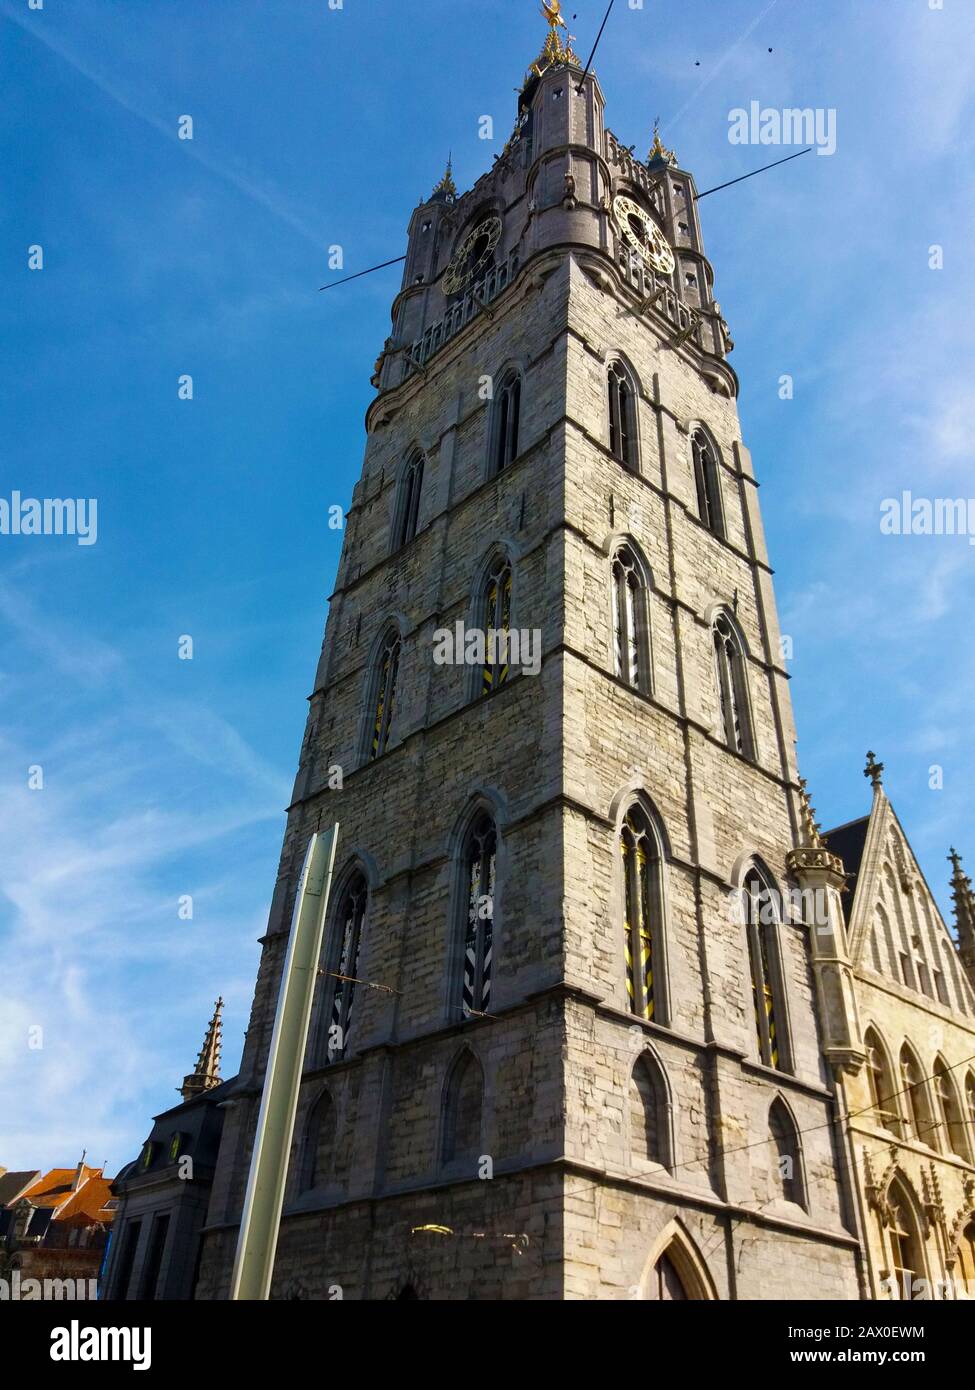 GENT, BELGIUM- 03.25.2017 Belfries tower of Ghent, an old medieval tower in the city center. Fortified Beffry tower. Stock Photo